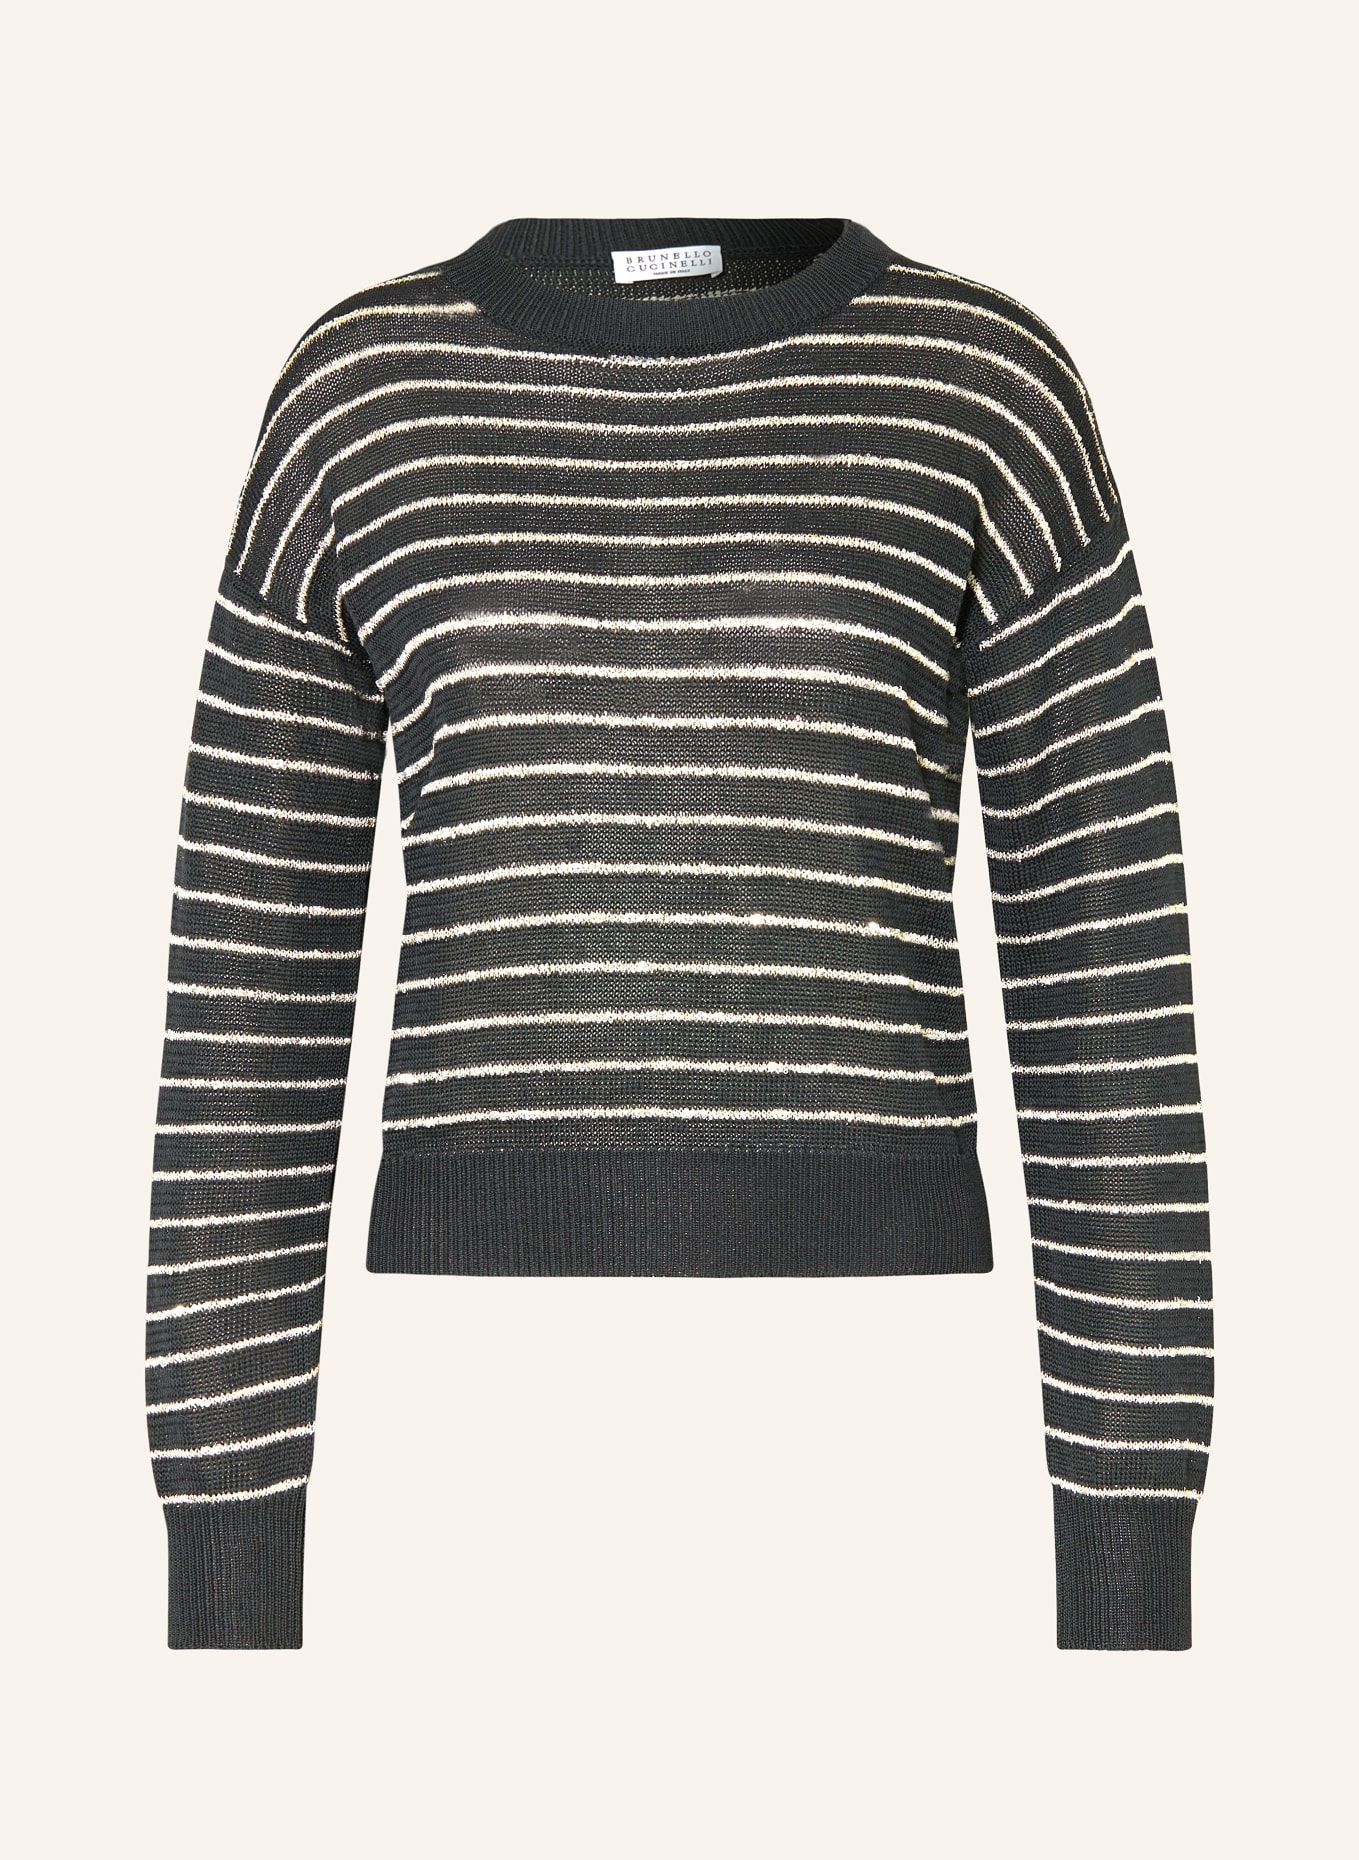 BRUNELLO CUCINELLI Sweater with sequins, Color: DARK GRAY/ LIGHT GRAY (Image 1)